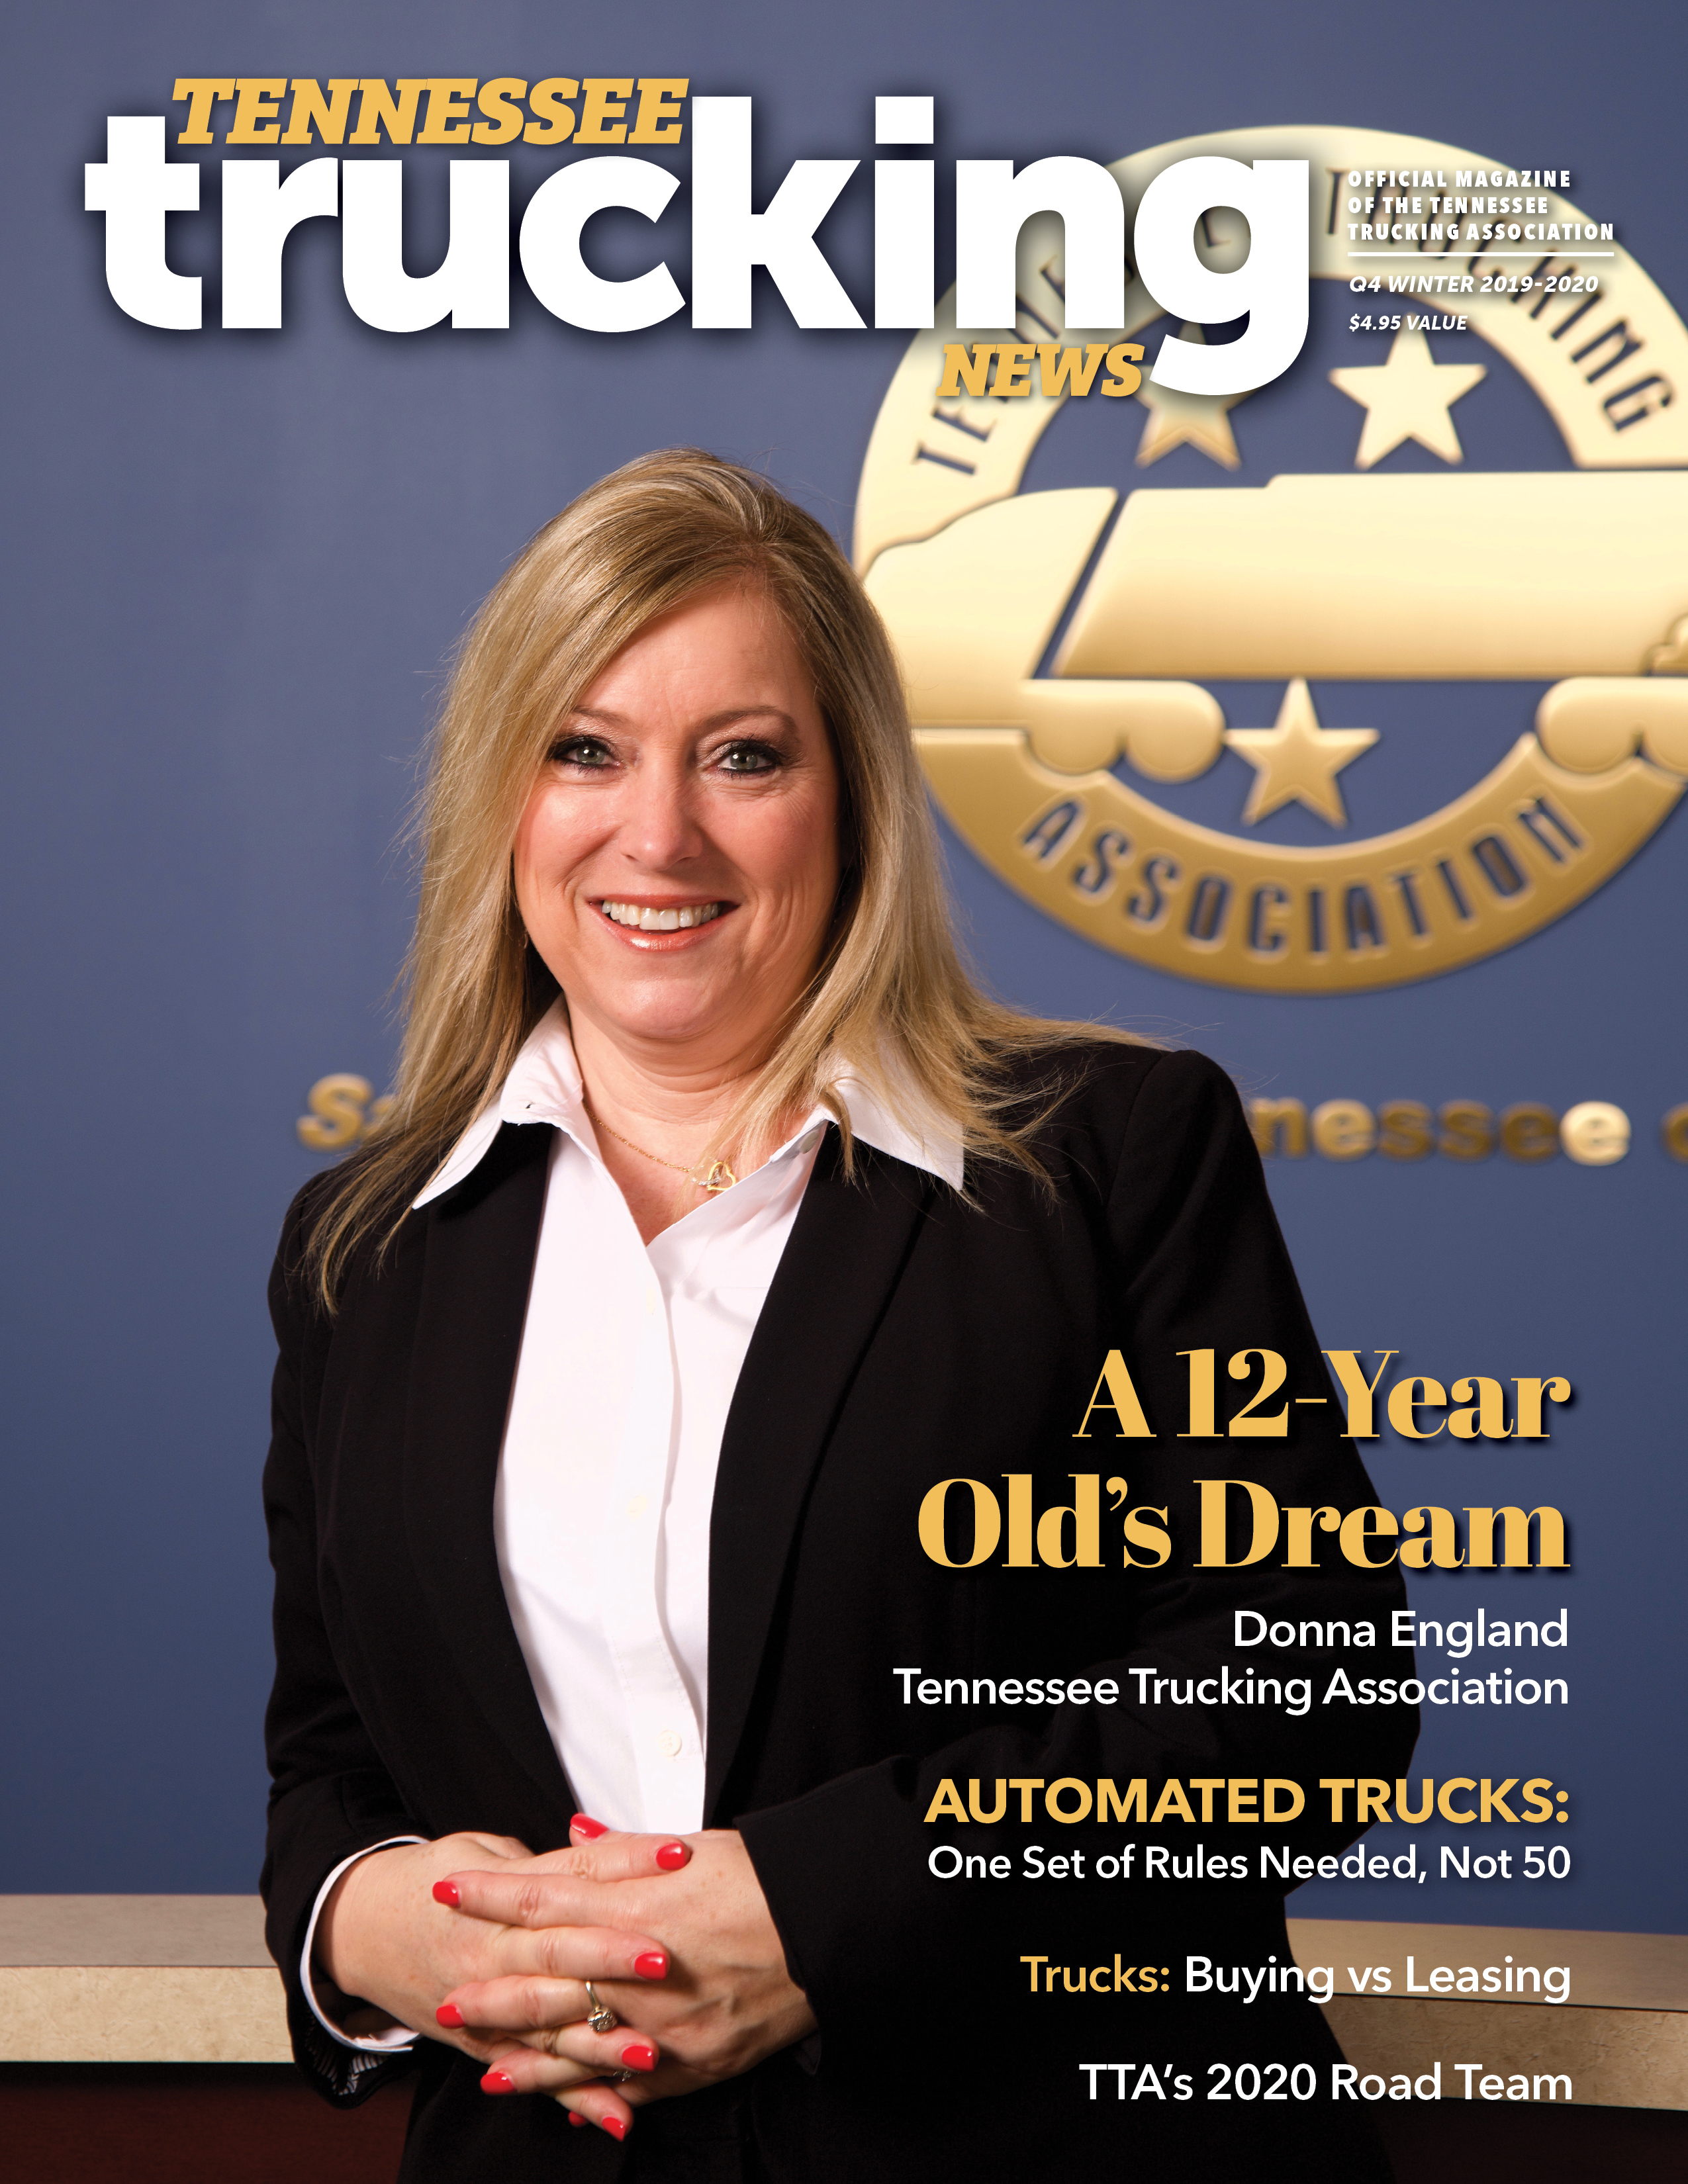 Tennessee Trucking News Q4 Winter 2019-2020 ~ Featuring Donna England of Tennessee Trucking Association